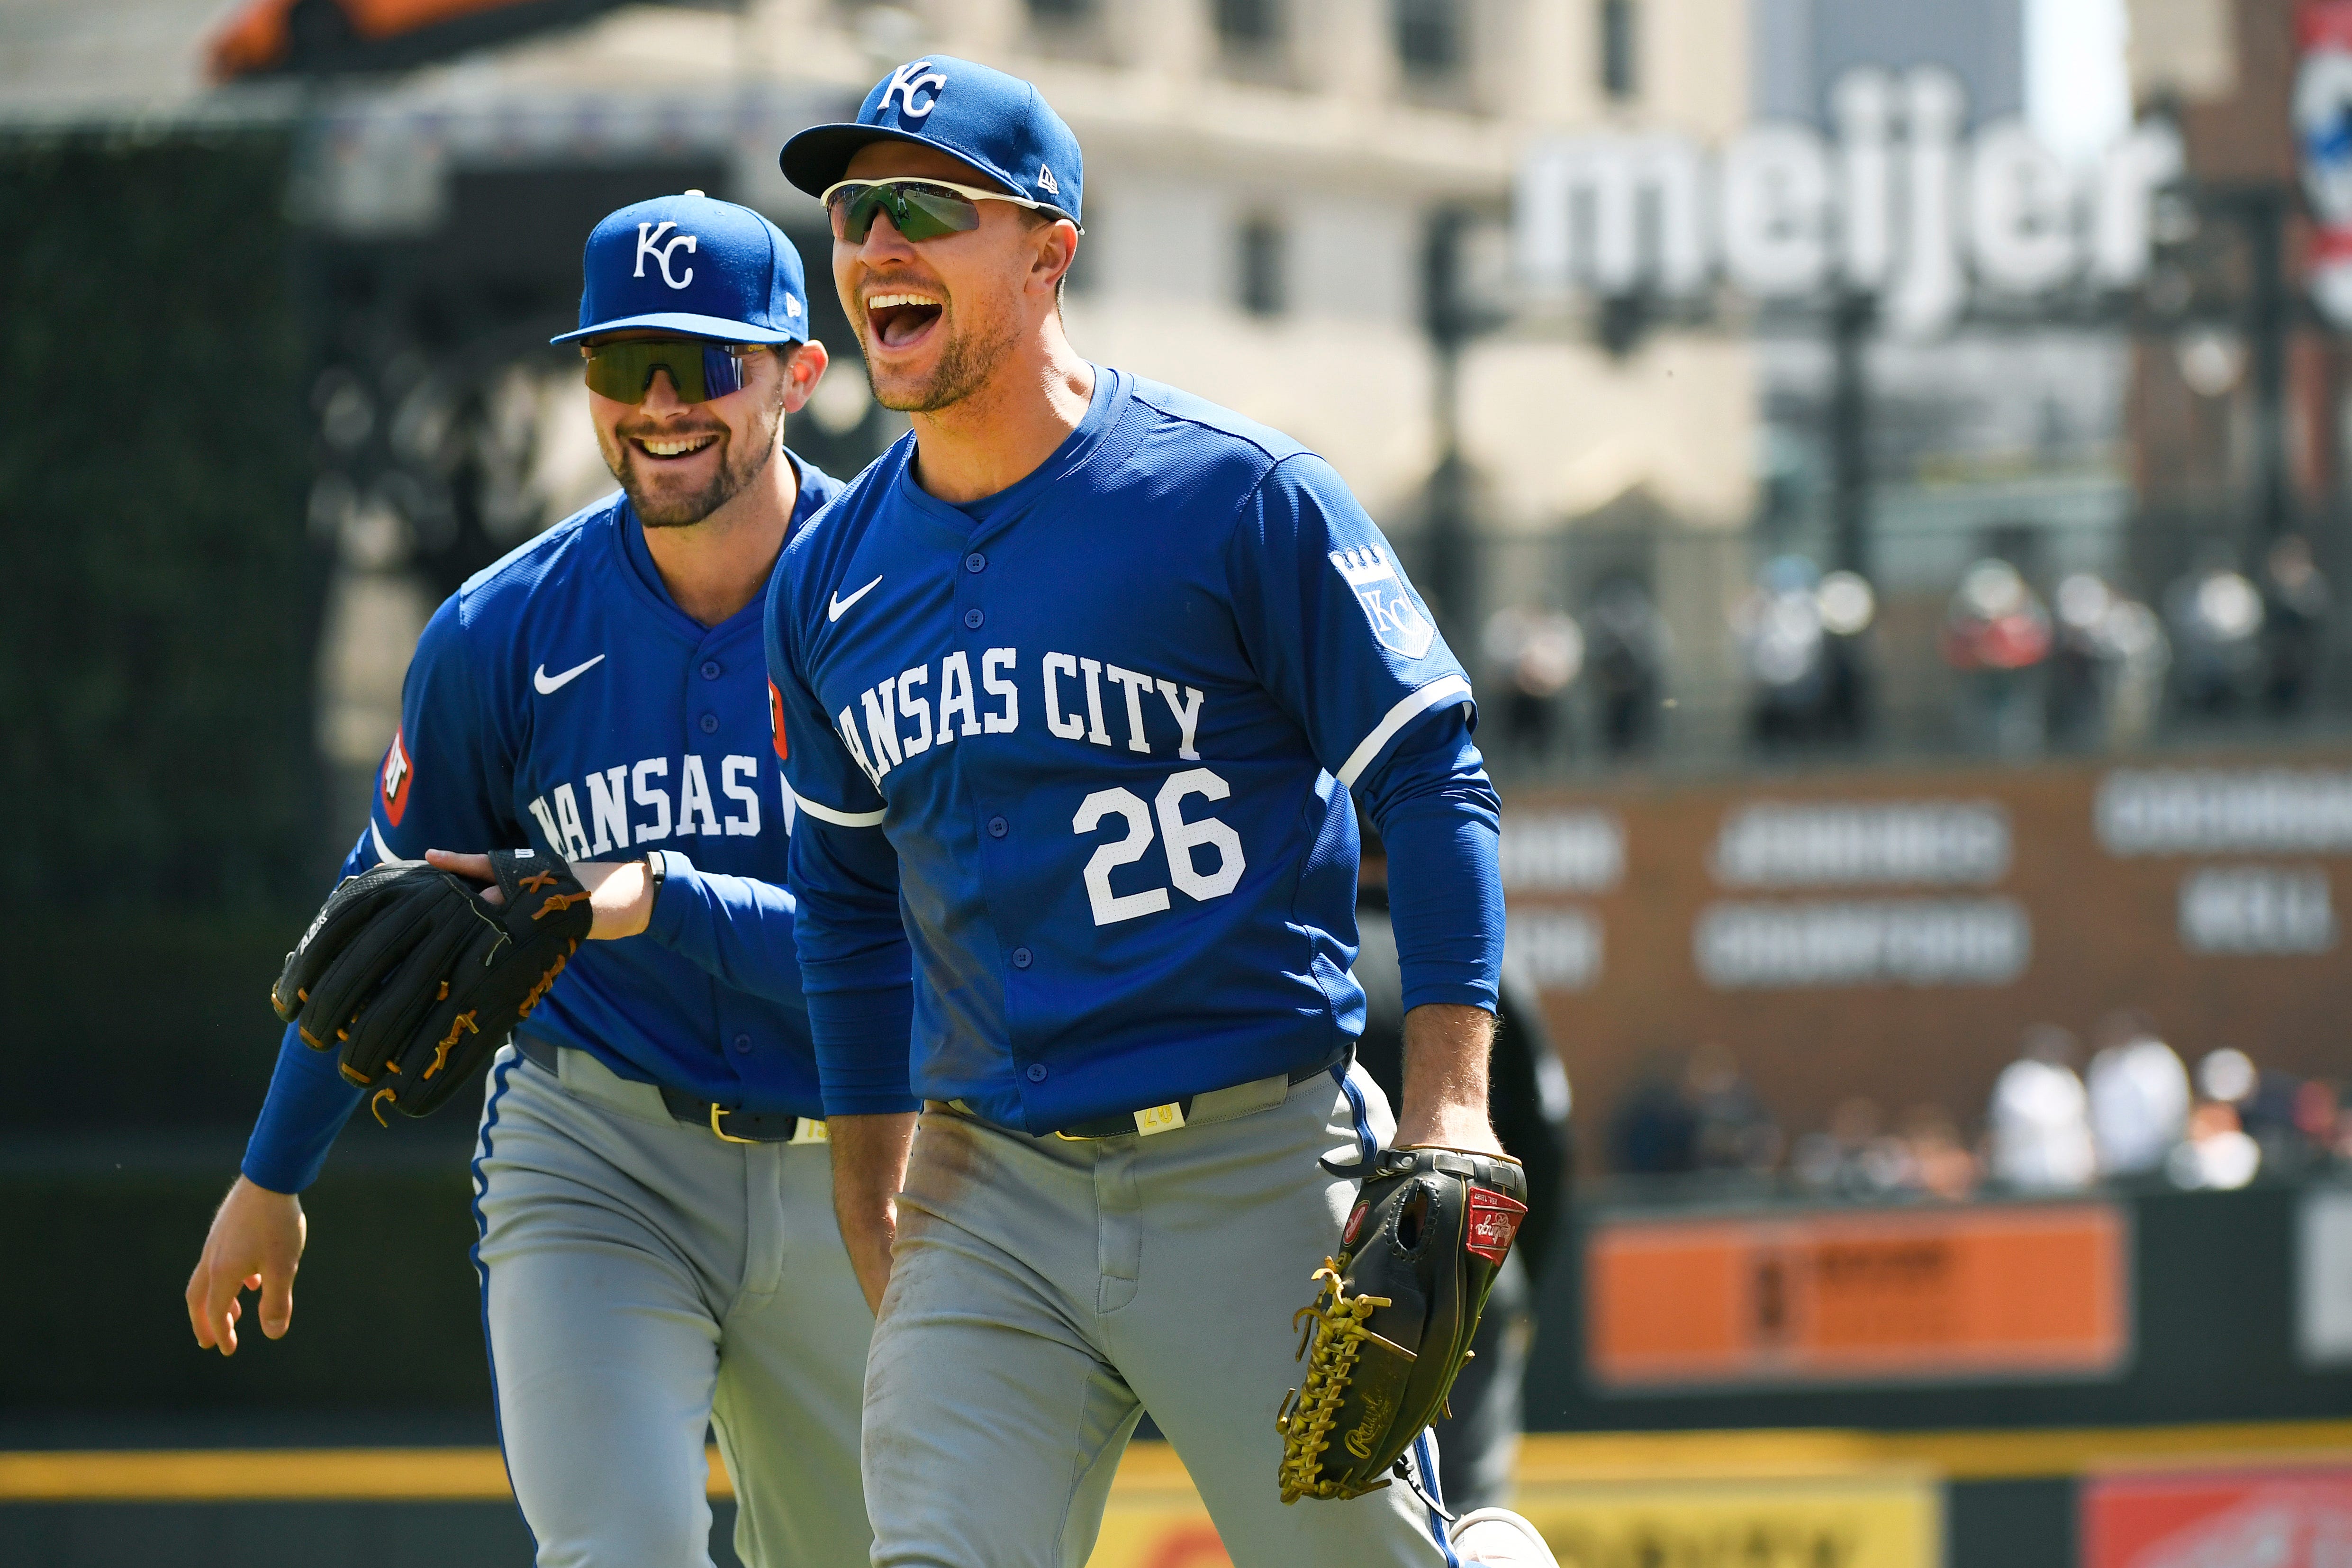 Royals right fielder Adam Frazier, front, is congratulated by Michael Massey after Frazier made a double play to end the third inning.